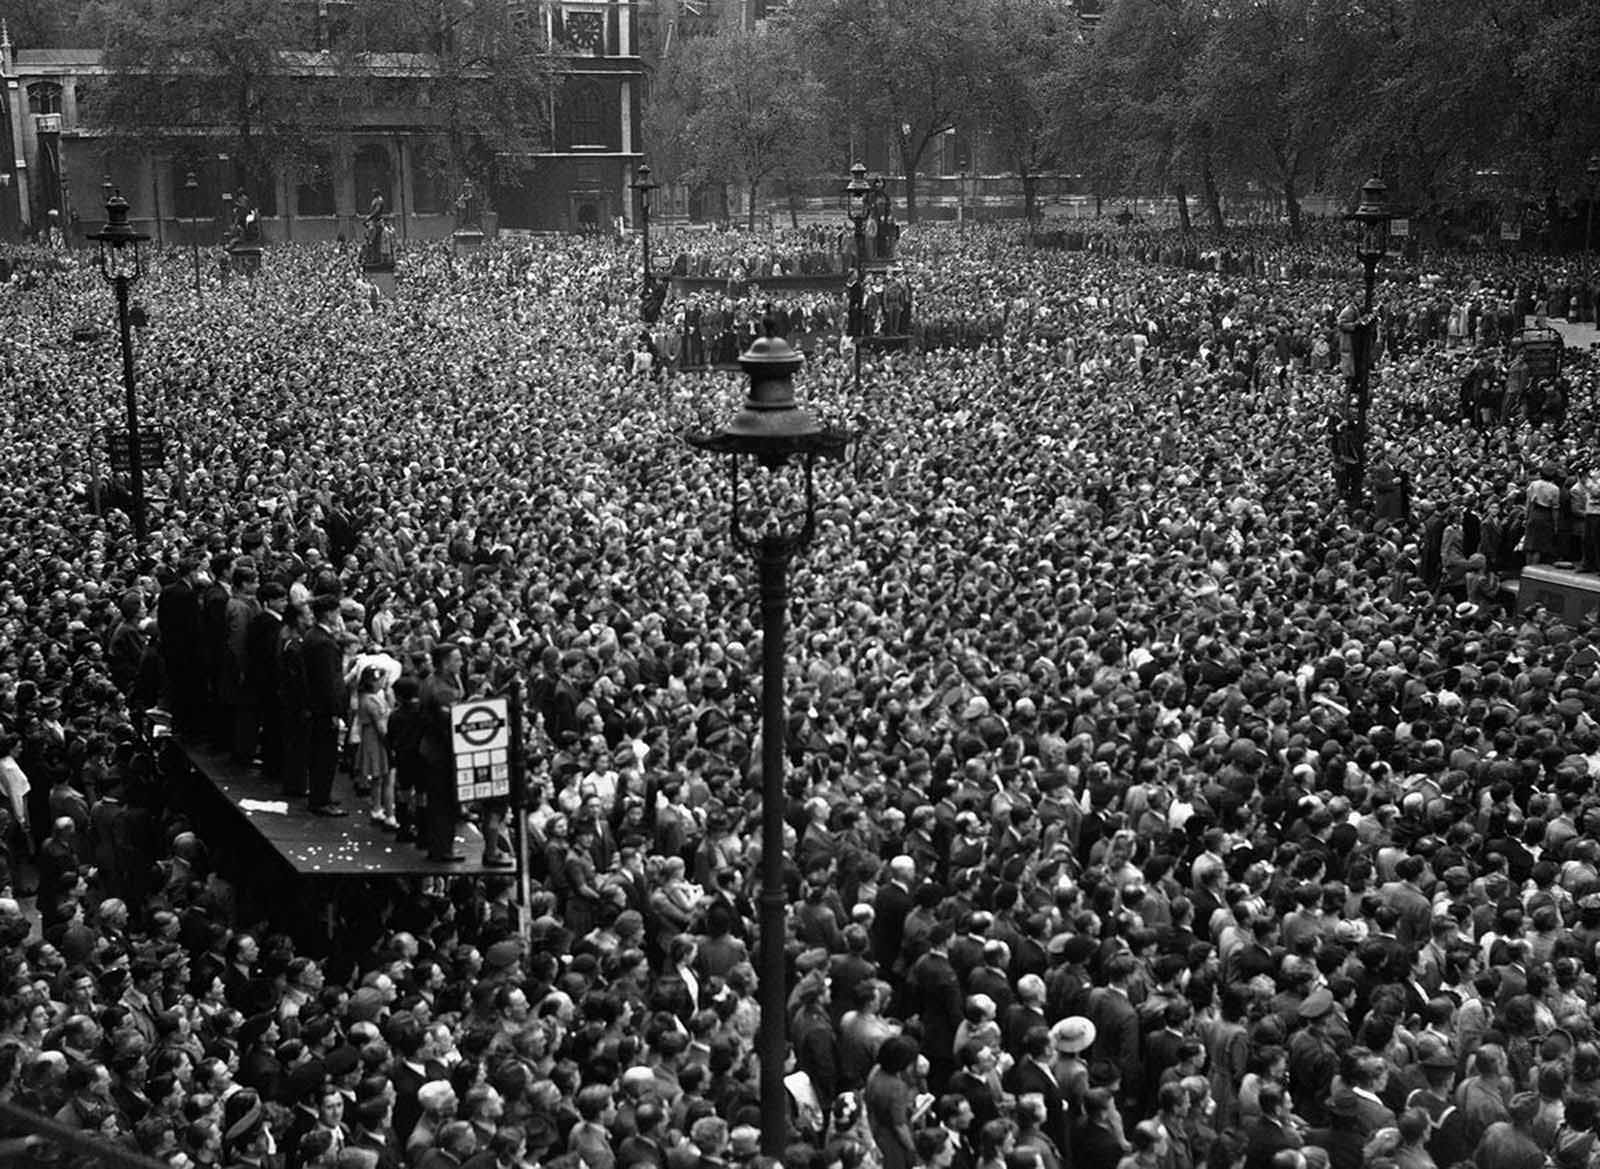 A seething mass of humanity jammed itself into Whitehall in central London on VE-Day (Victory in Europe Day), May 8, 1945, to hear the premier officially announce Germany’s unconditional surrender. More than one million people celebrated in the streets of London.